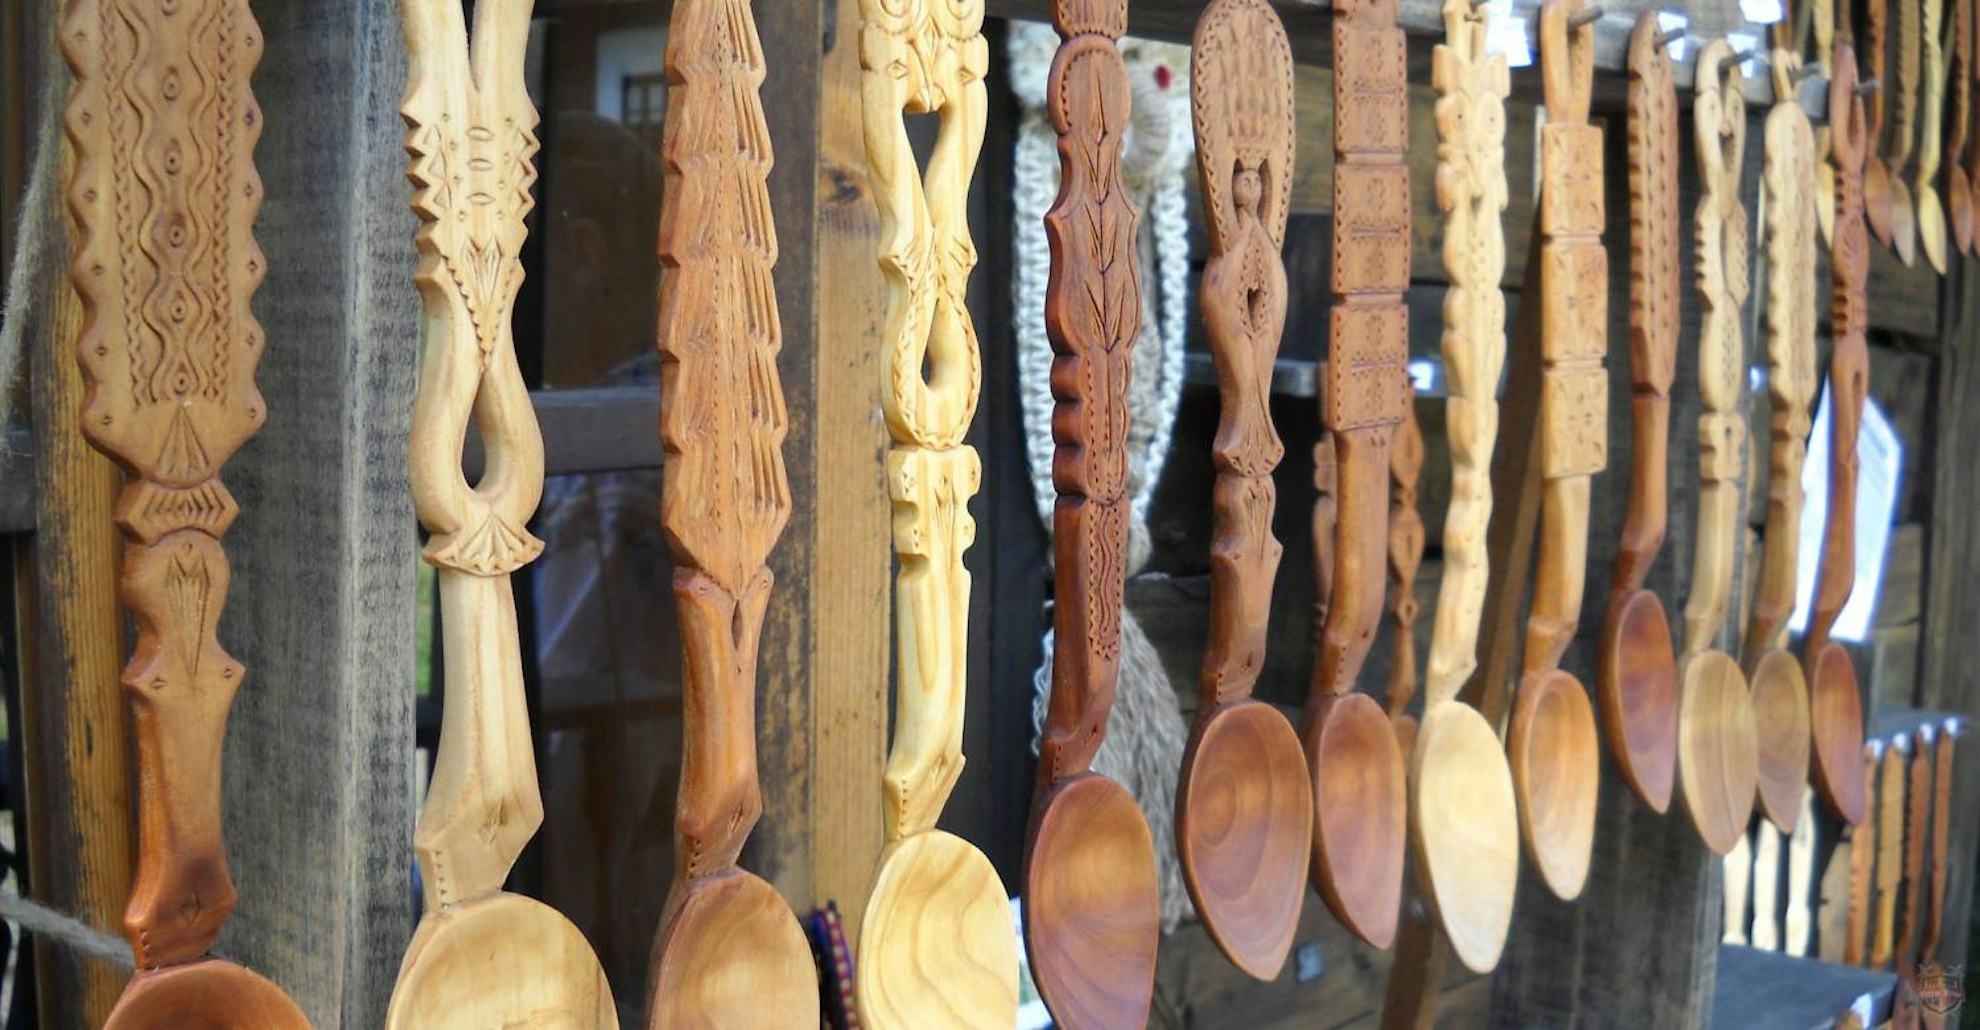 Wooden spoon manually carved out from Transylvania